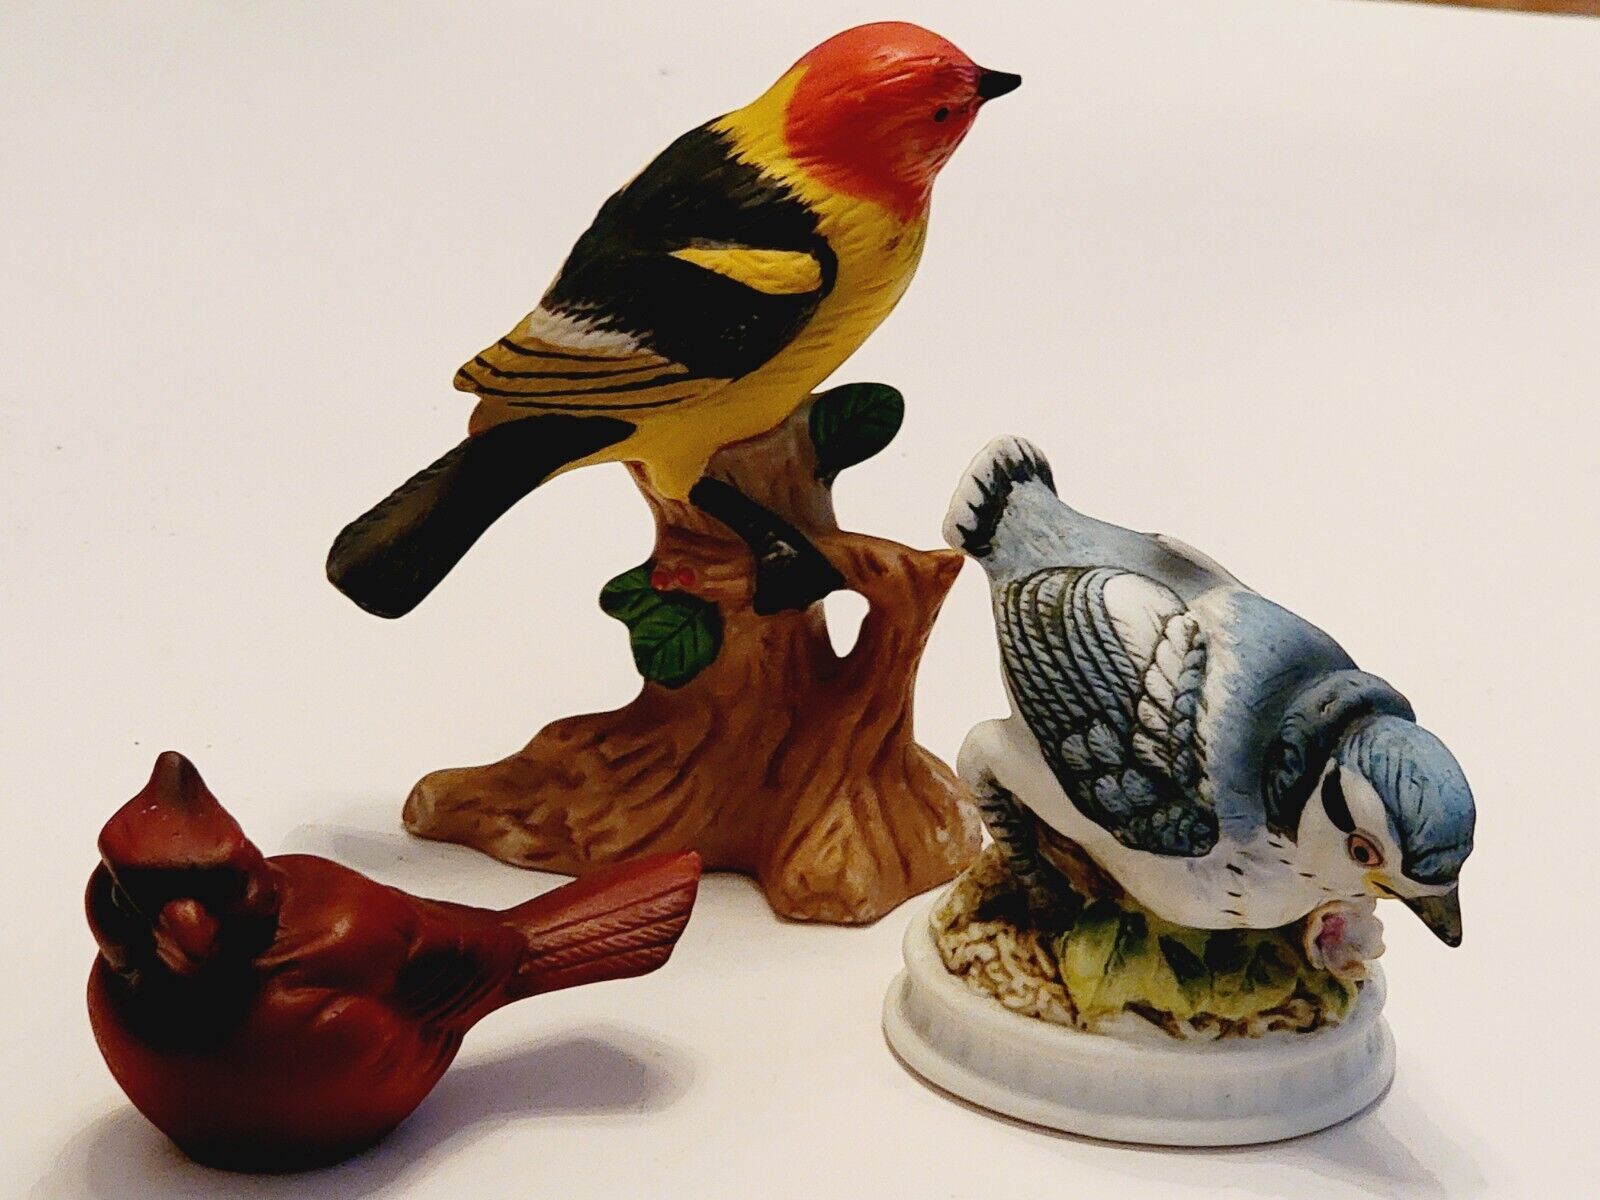 Three Vntg Beautiful Song Bird Figurines Please See Description For Full Details